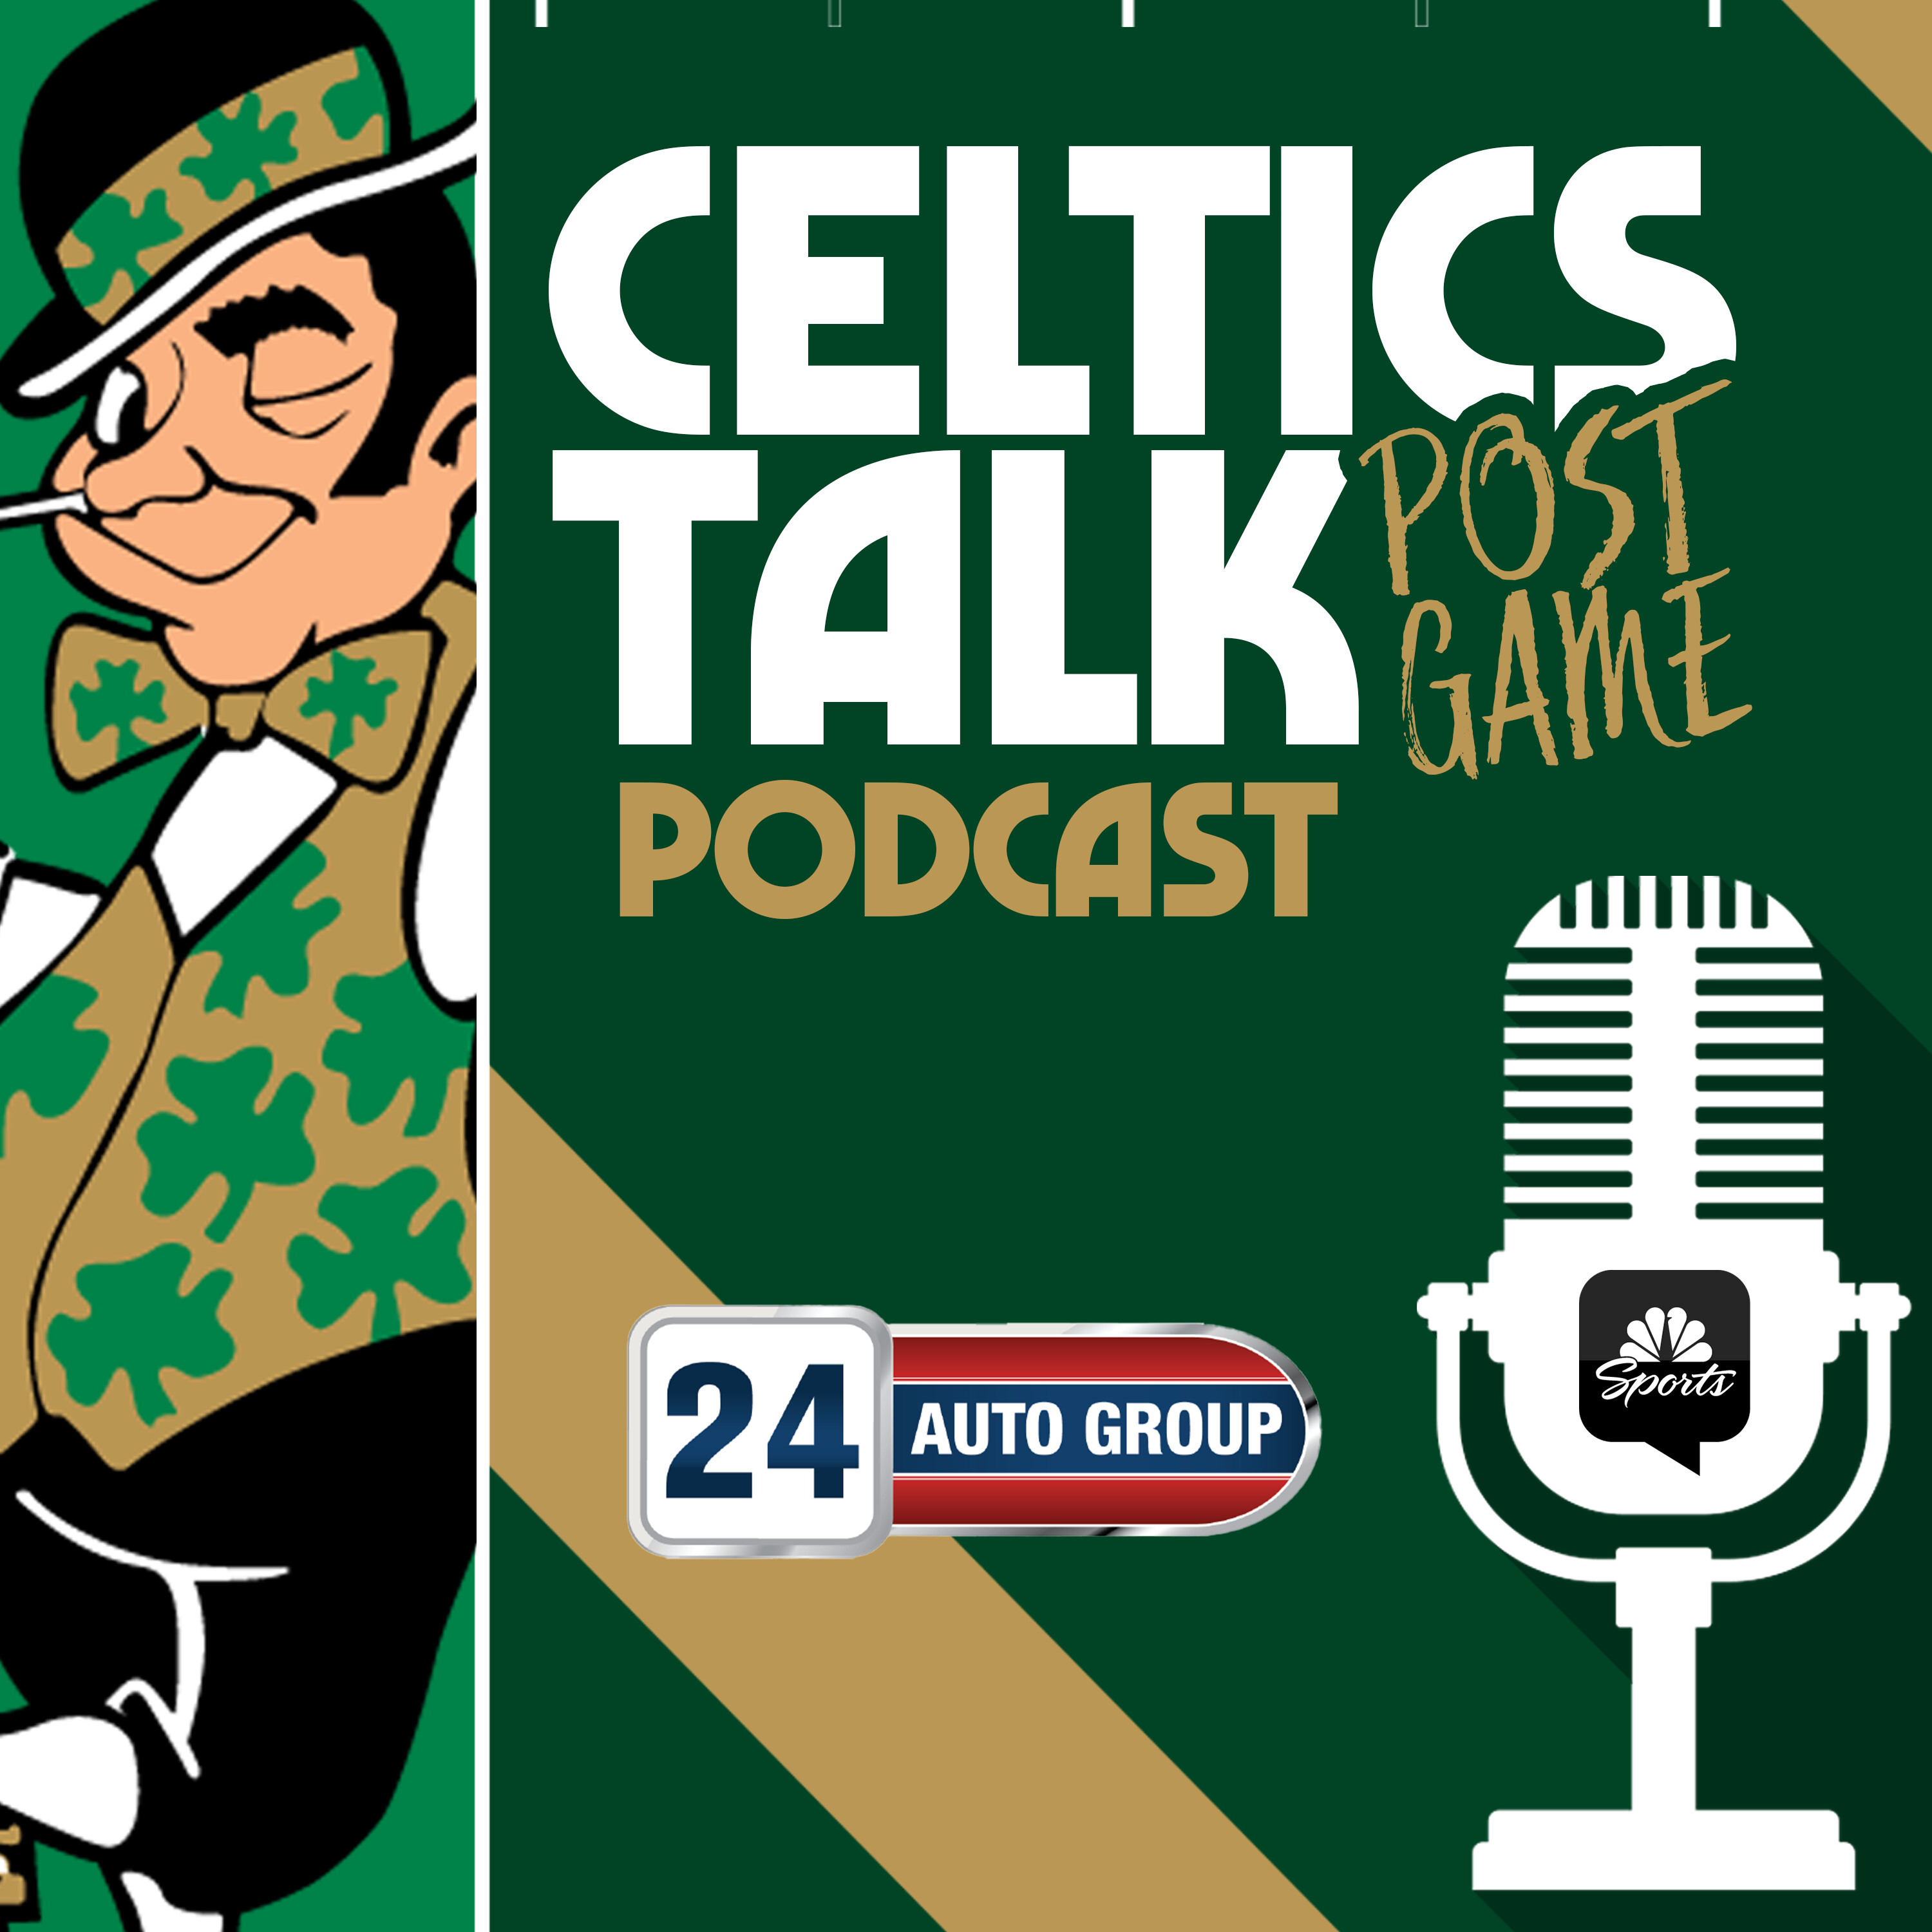 POSTGAME POD: Jayson Tatum PUTS ON A SHOW for the MVP voters as he closes out the win vs. Bulls